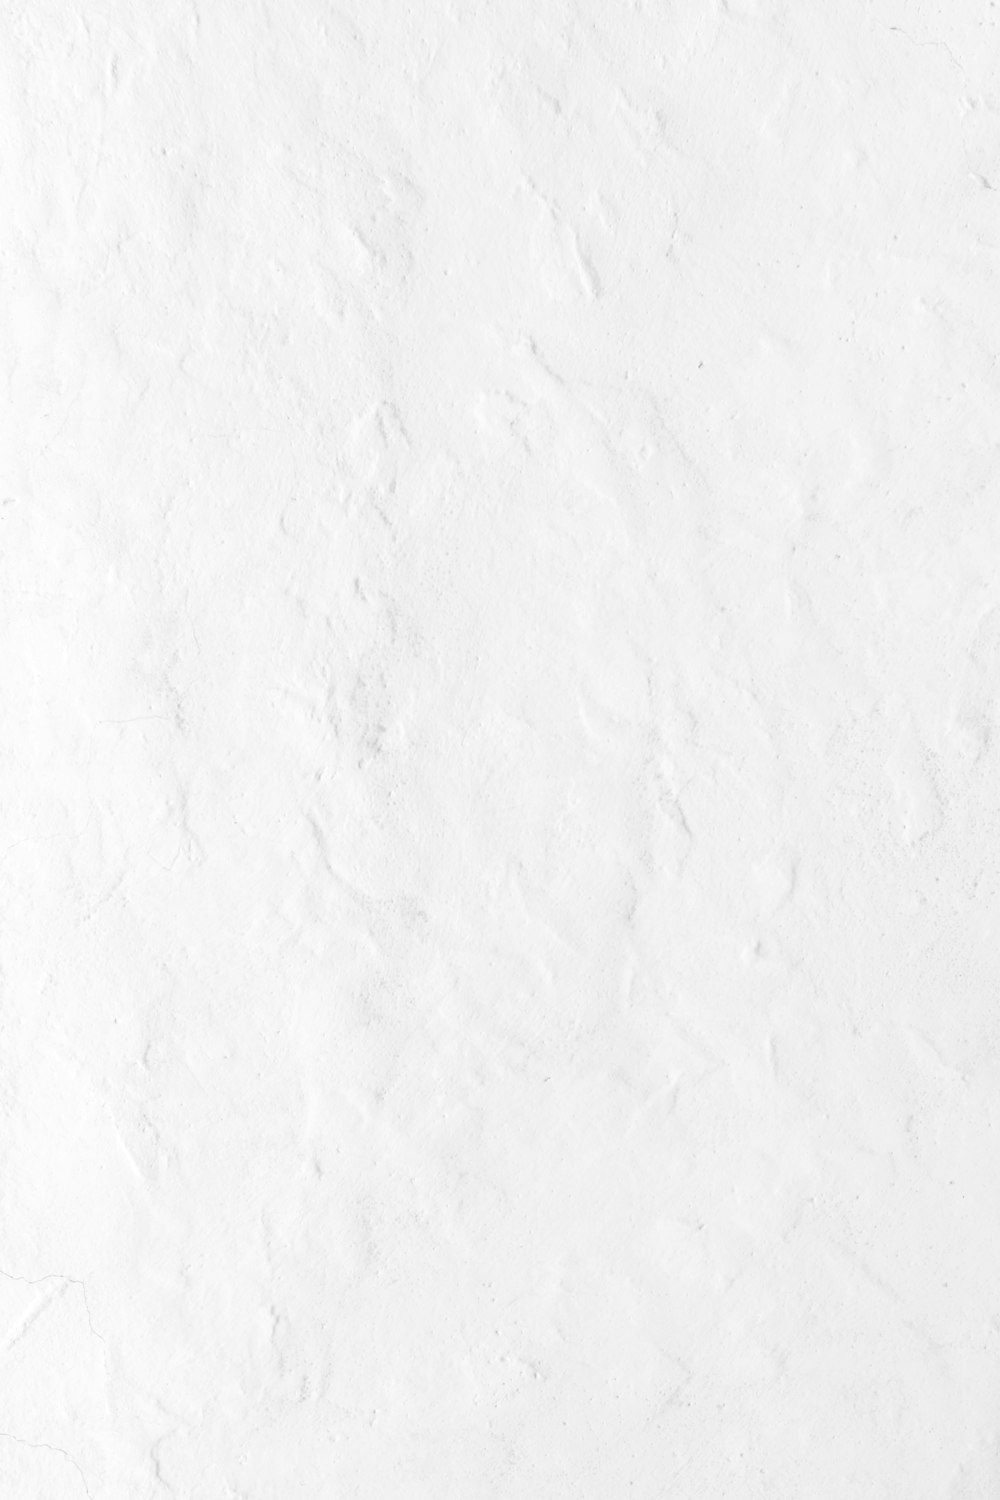 White Theme Pictures | Download Free Images on Unsplash